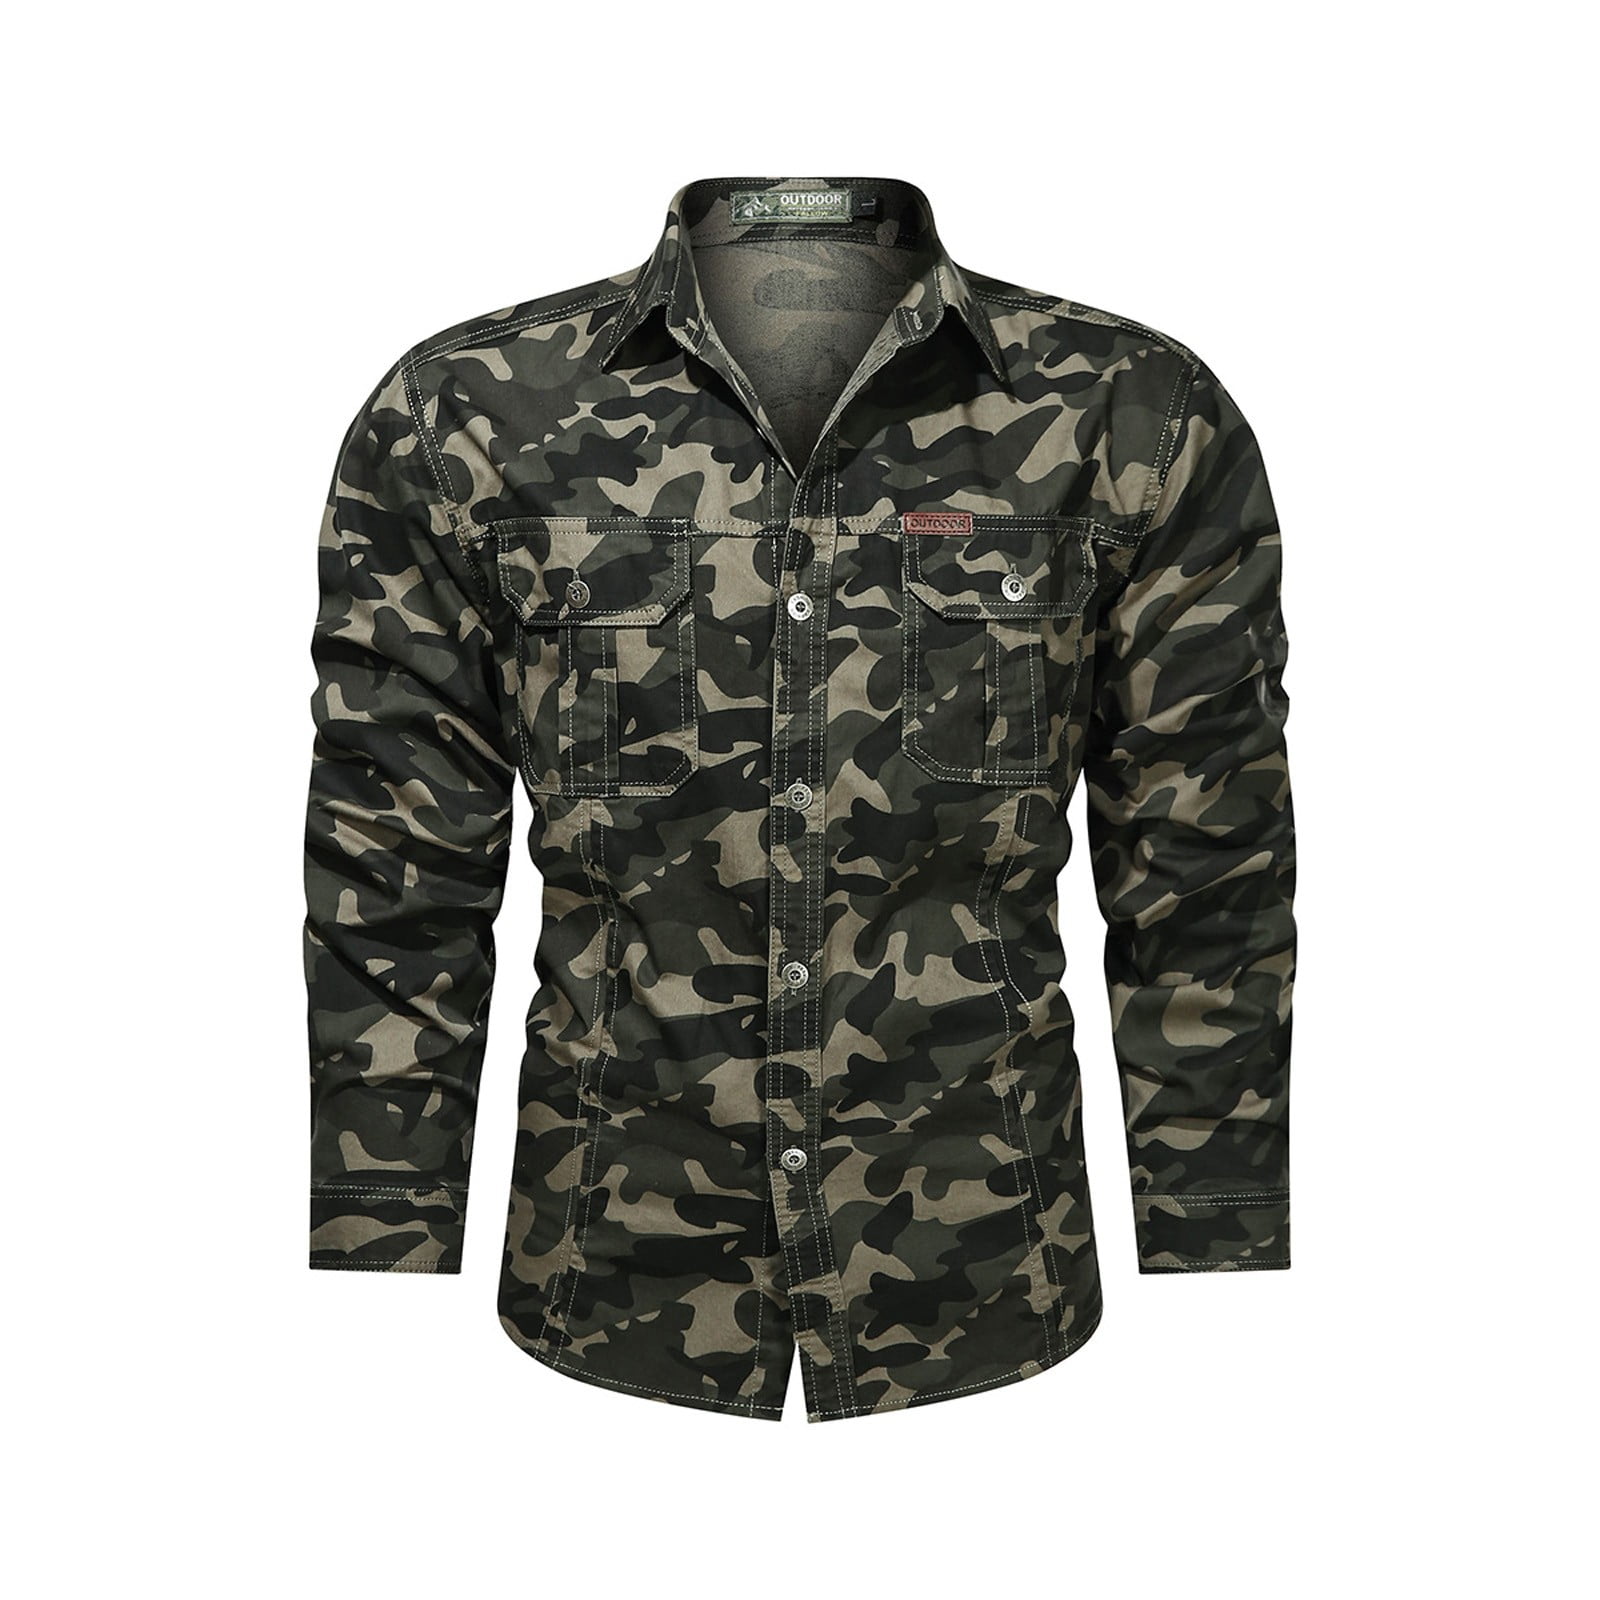 Verplicht gebied formaat Male Autumn Winter Cotton Single Breasted Double Pocket Long Sleeve Camo  Washed Military Shirt - Walmart.com